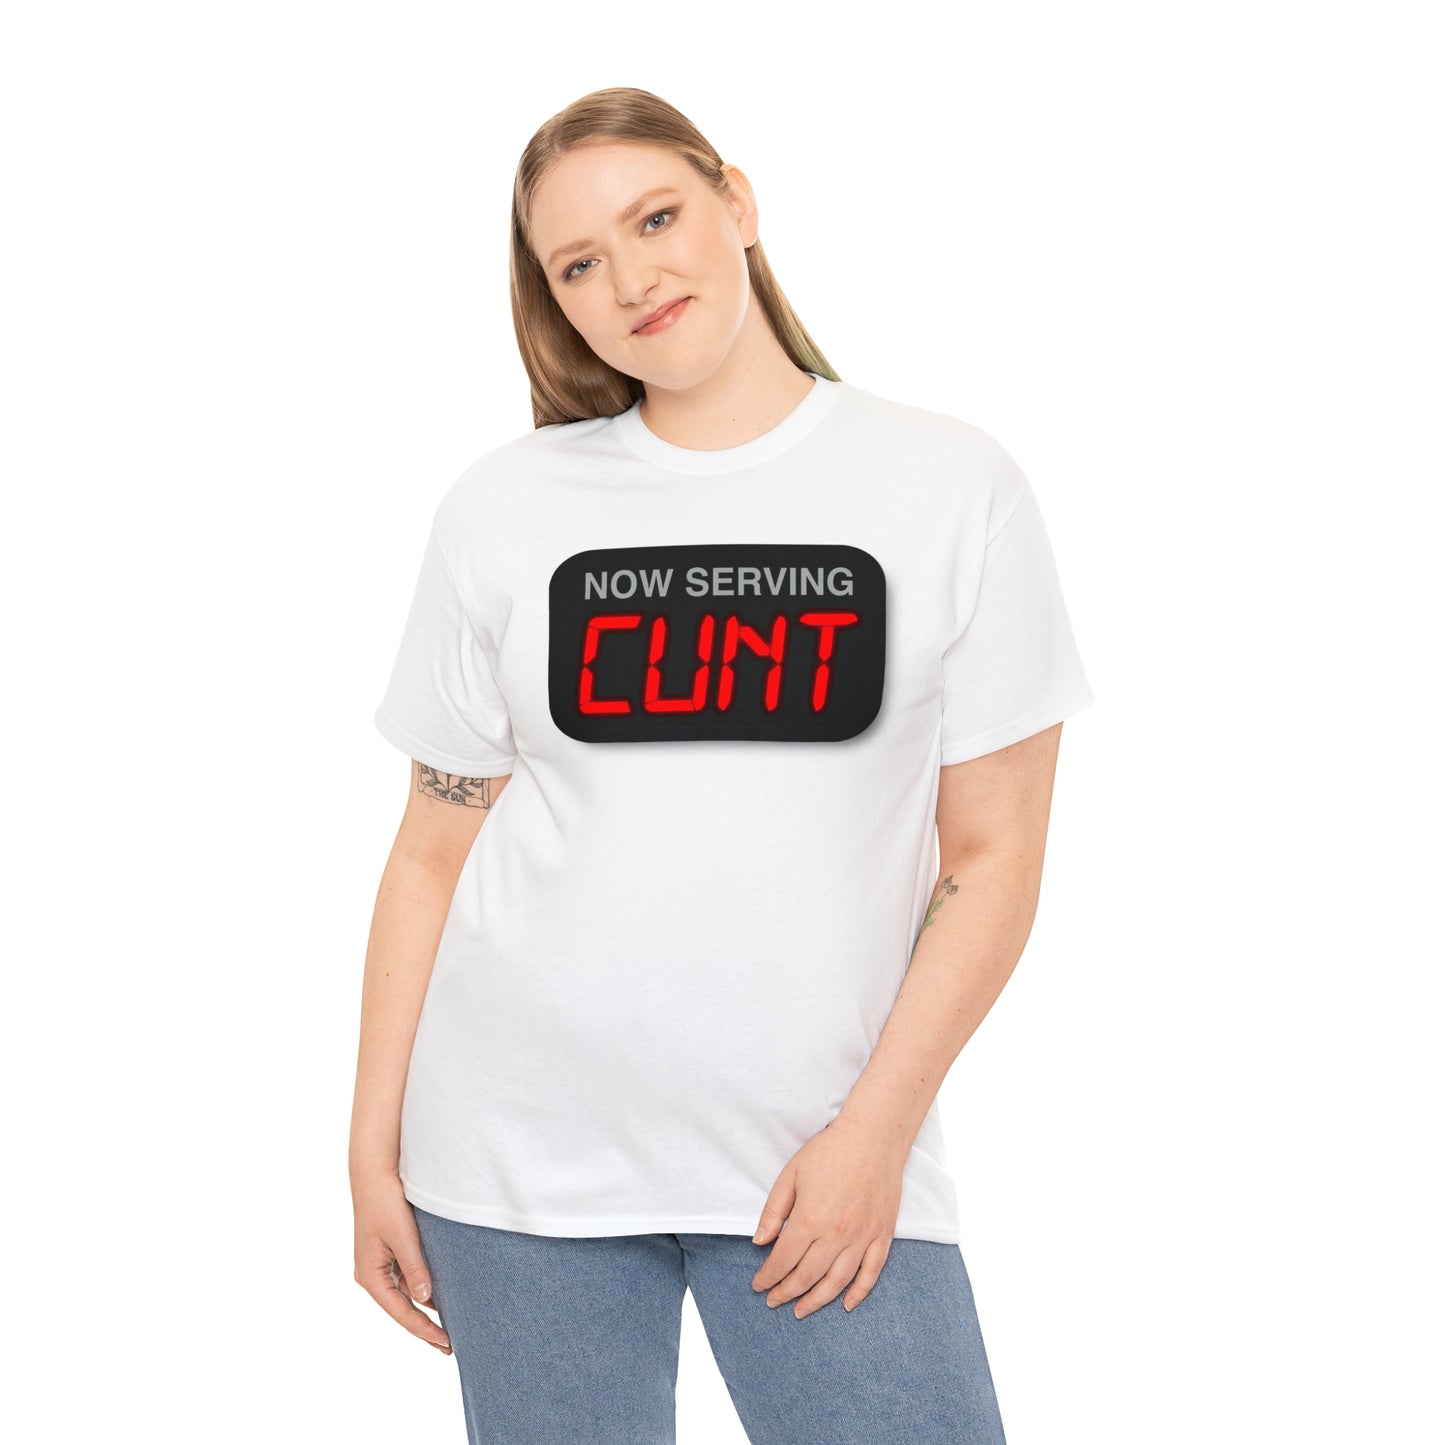 Now Serving Cunt.